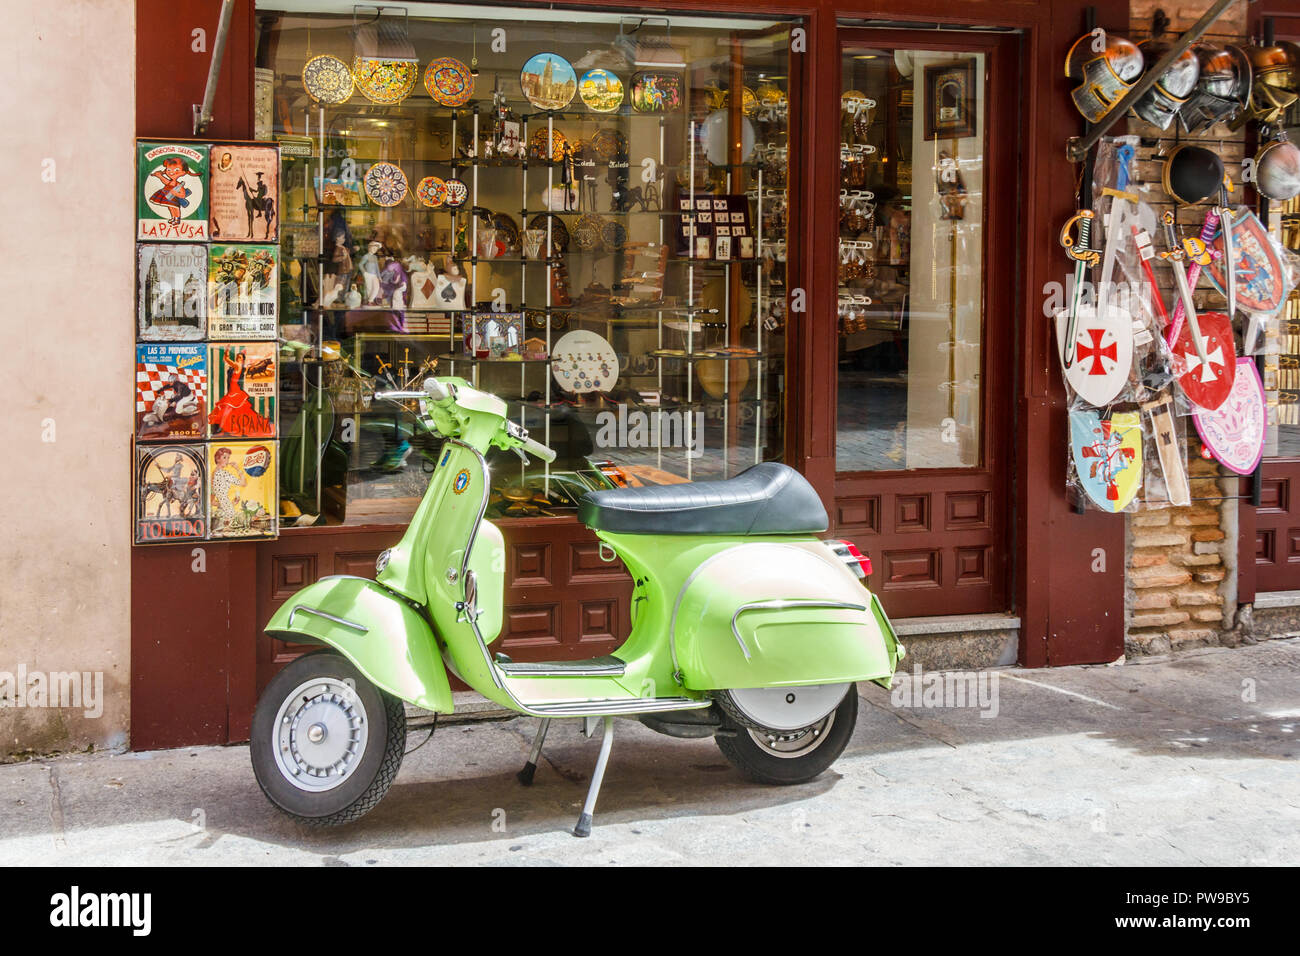 Toledo, Spain - 6th June 2018: : Lime green scooter parked outside souvenir shop. Scooters are ideal for travelling around the narrow streets. Stock Photo